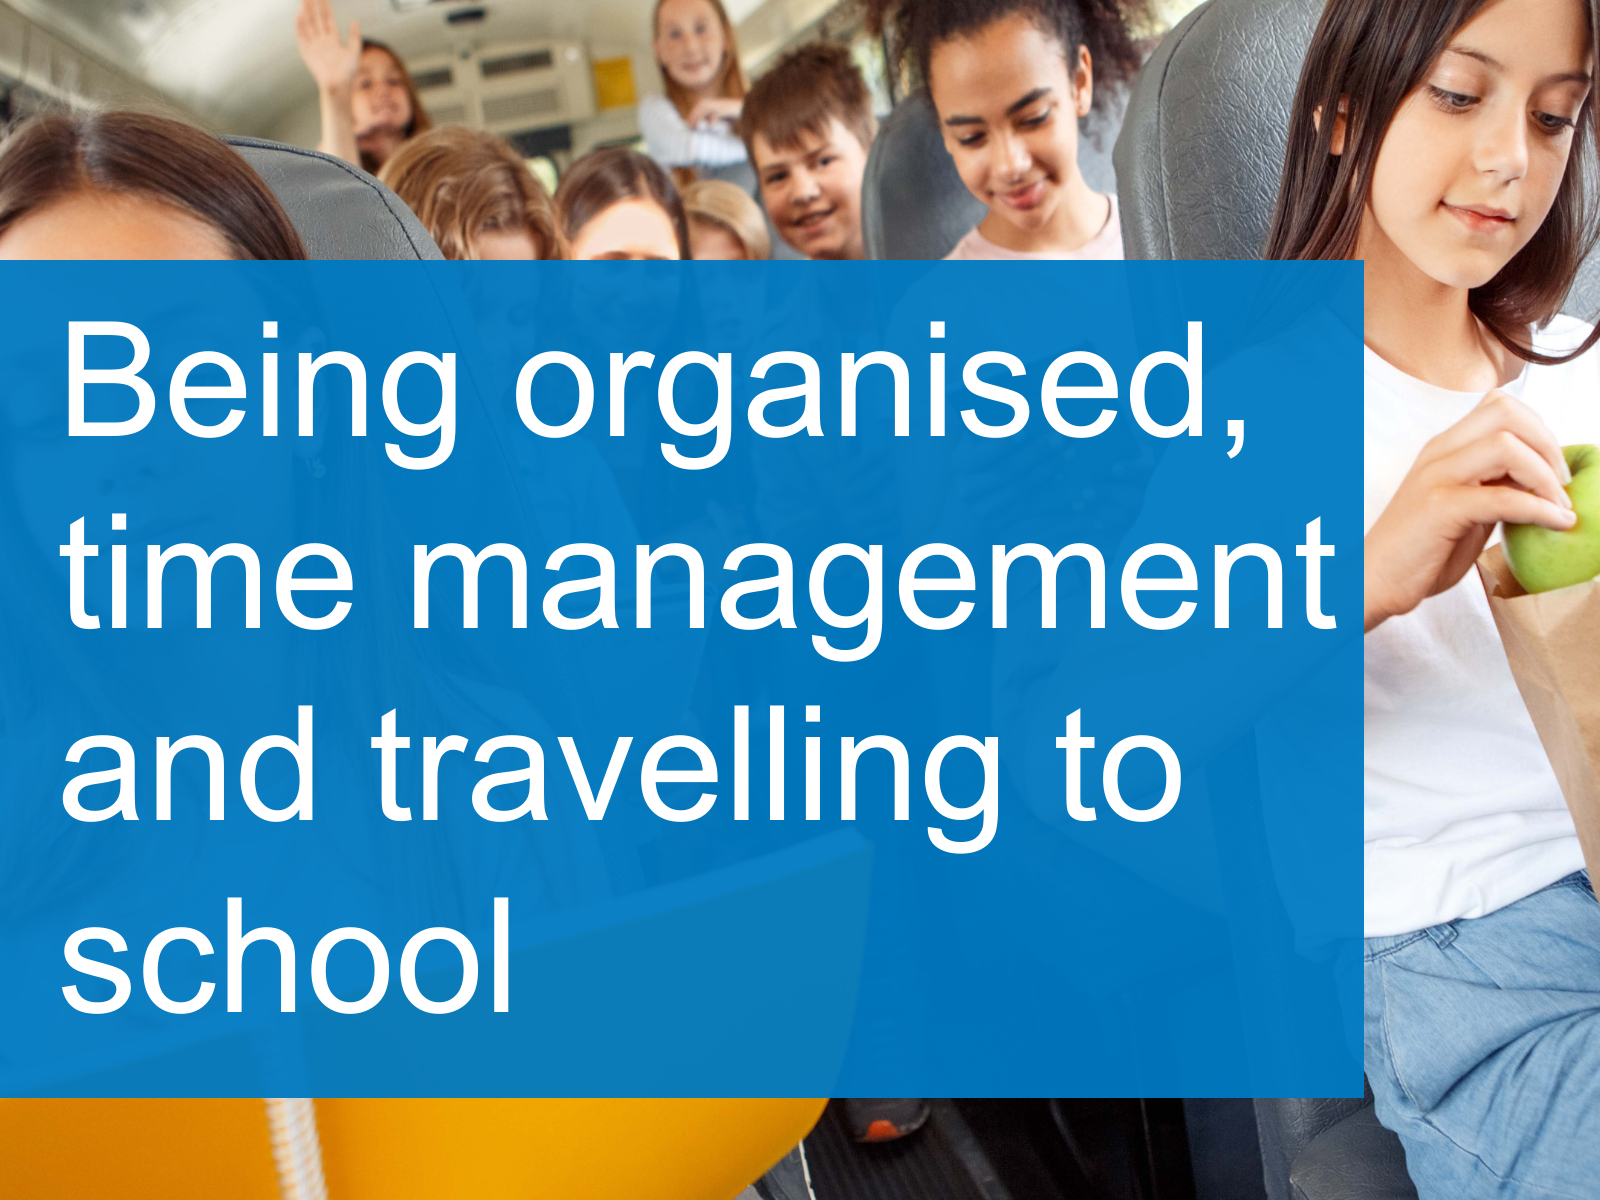 Being orgnaised, time management and travelling to school